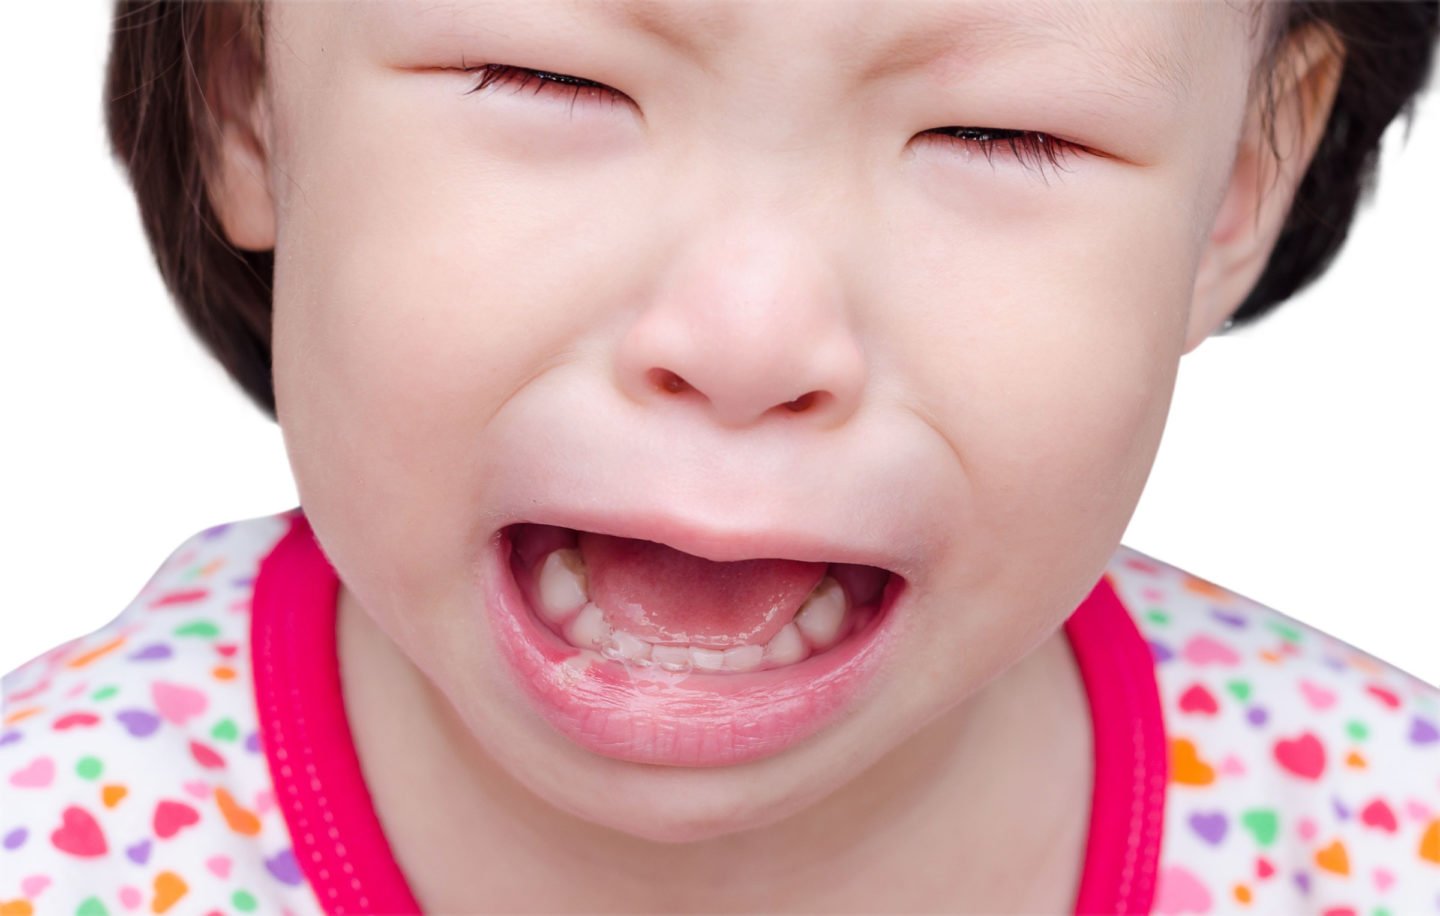 Crying Child With Canker Sore In Mouth